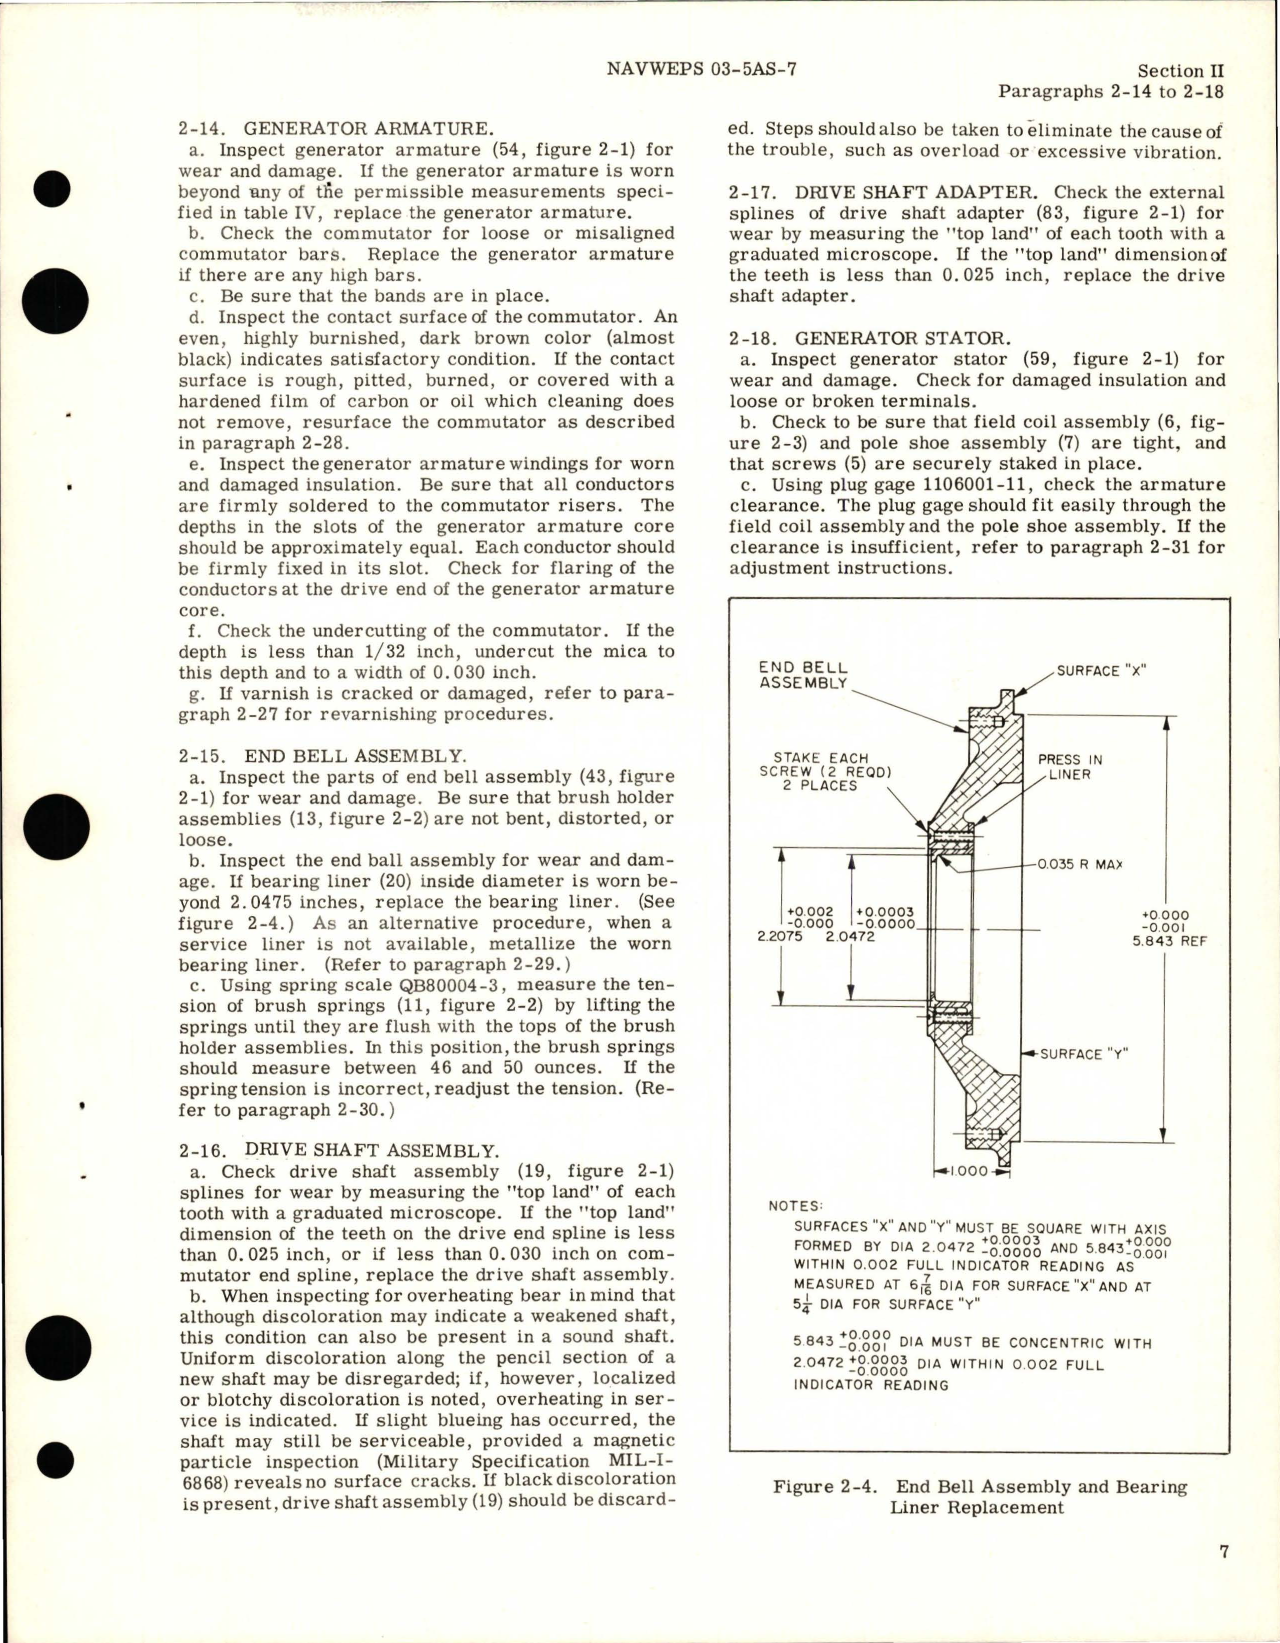 Sample page 5 from AirCorps Library document: Overhaul Instructions for Direct Current Generator (Starter Generator) 